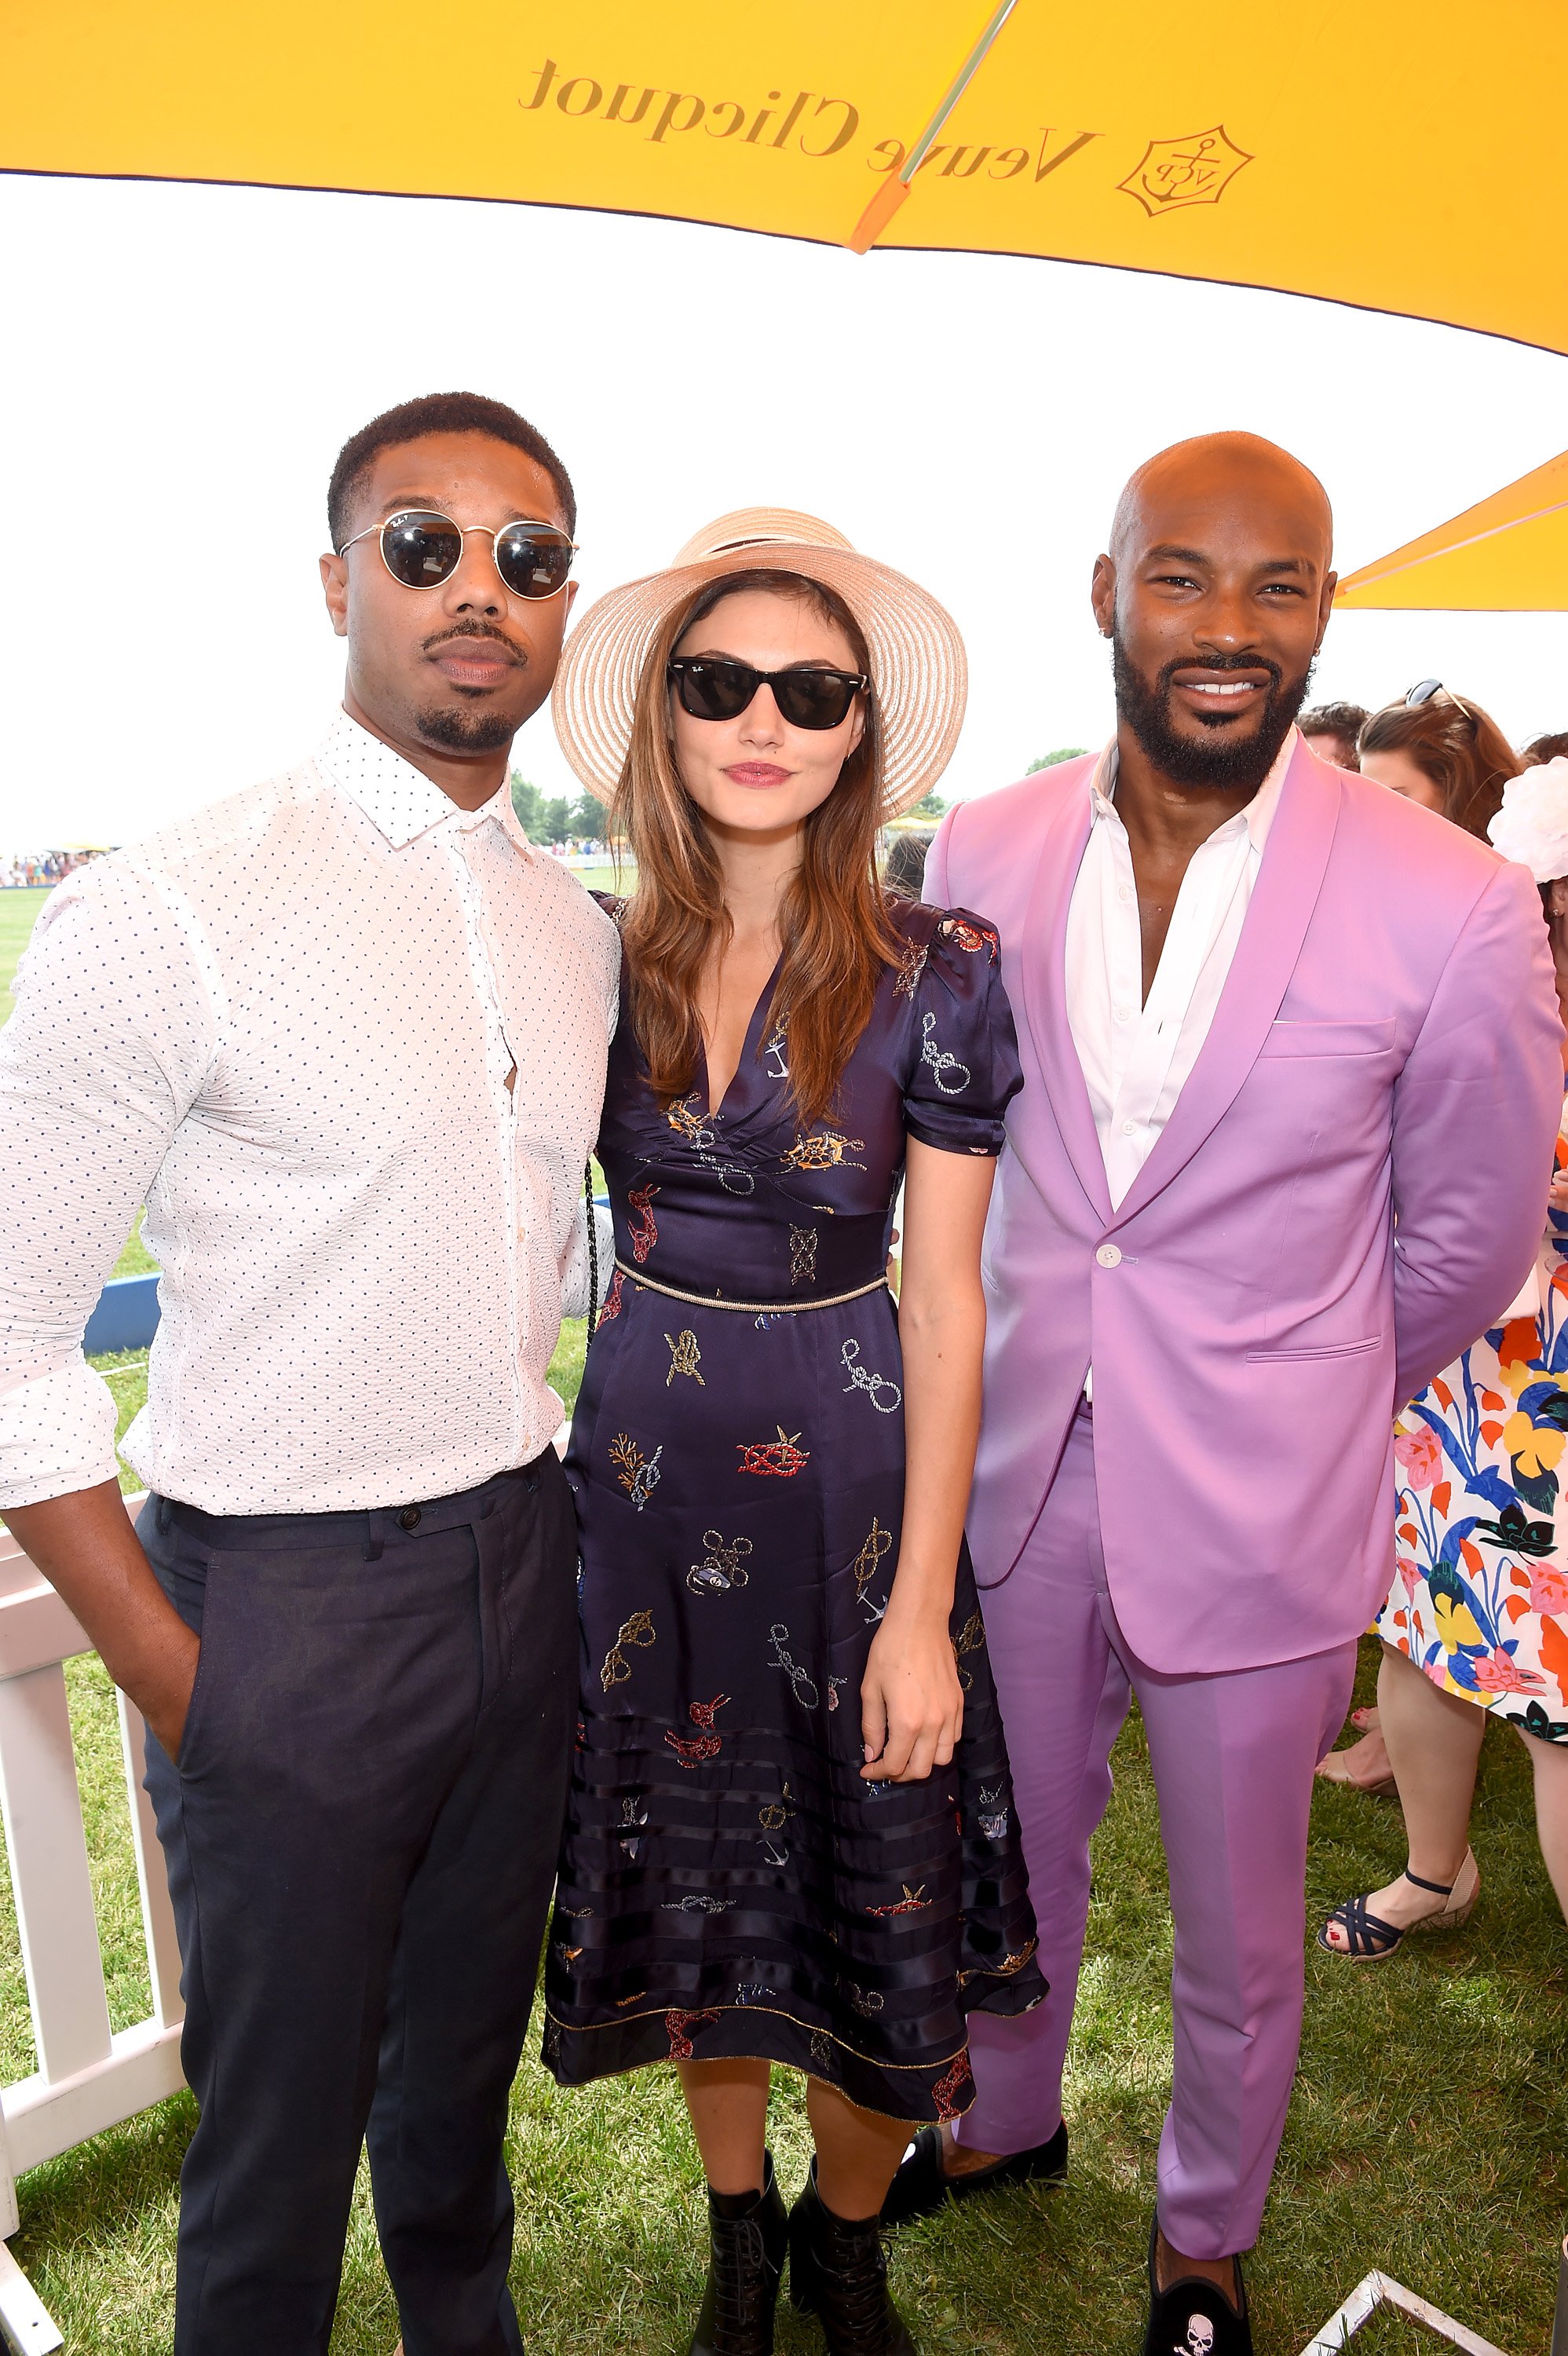 JERSEY CITY, NJ - JUNE 04:  (L-R) Michael B. Jordan, Phoebe Tonkin and Tyson Beckford attend the Ninth Annual Veuve Clicquot Polo Classic at Liberty State Park on June 4, 2016 in Jersey City, New Jersey.  (Photo by Jamie McCarthy/Getty Images for Veuve Clicquot)